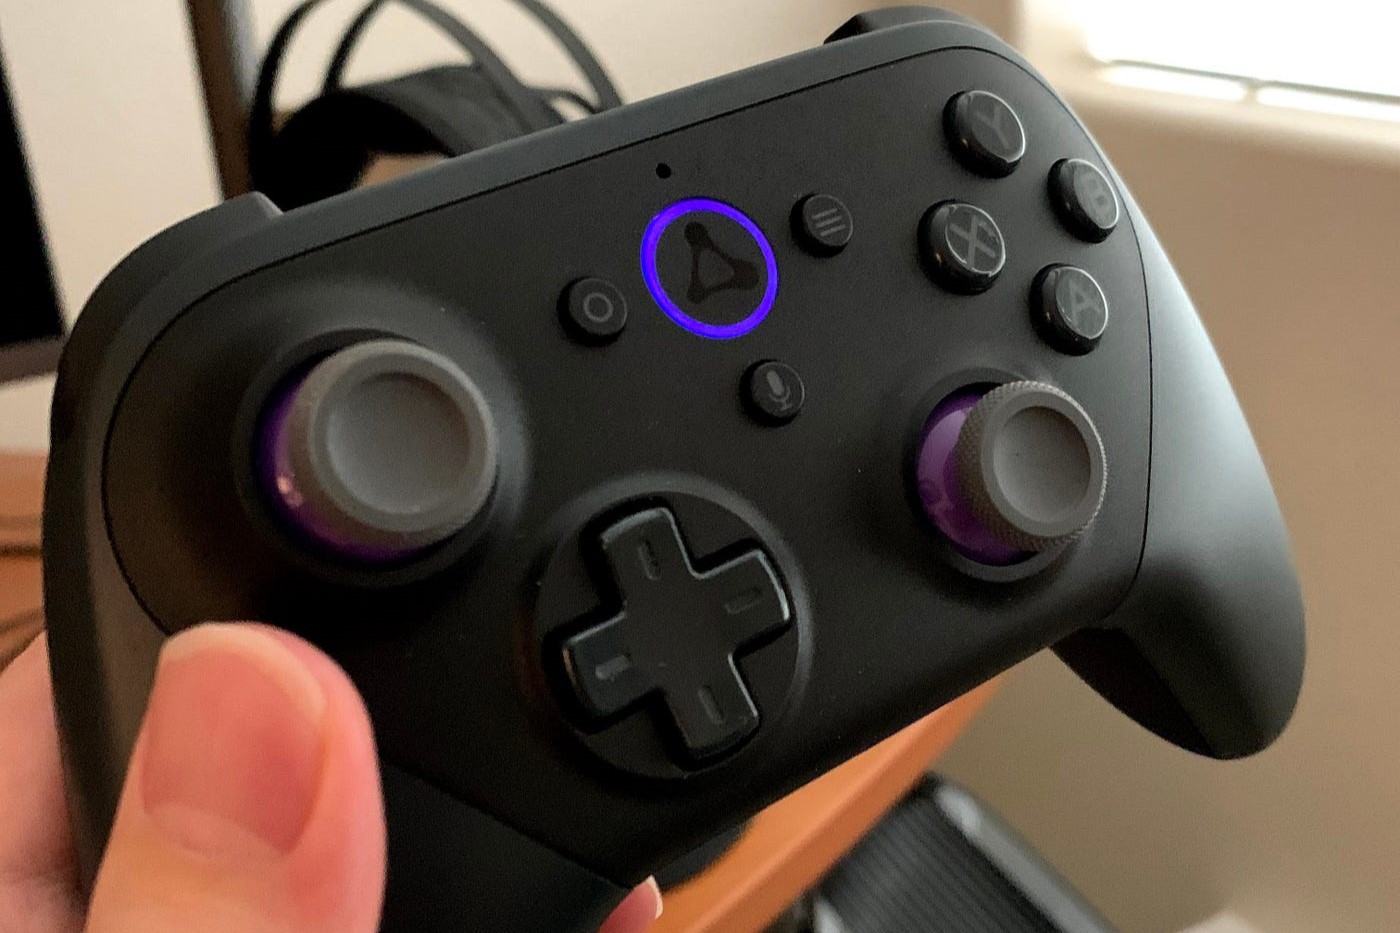 Gaming Control: Disabling Blue Light On The Switch Pro Controller